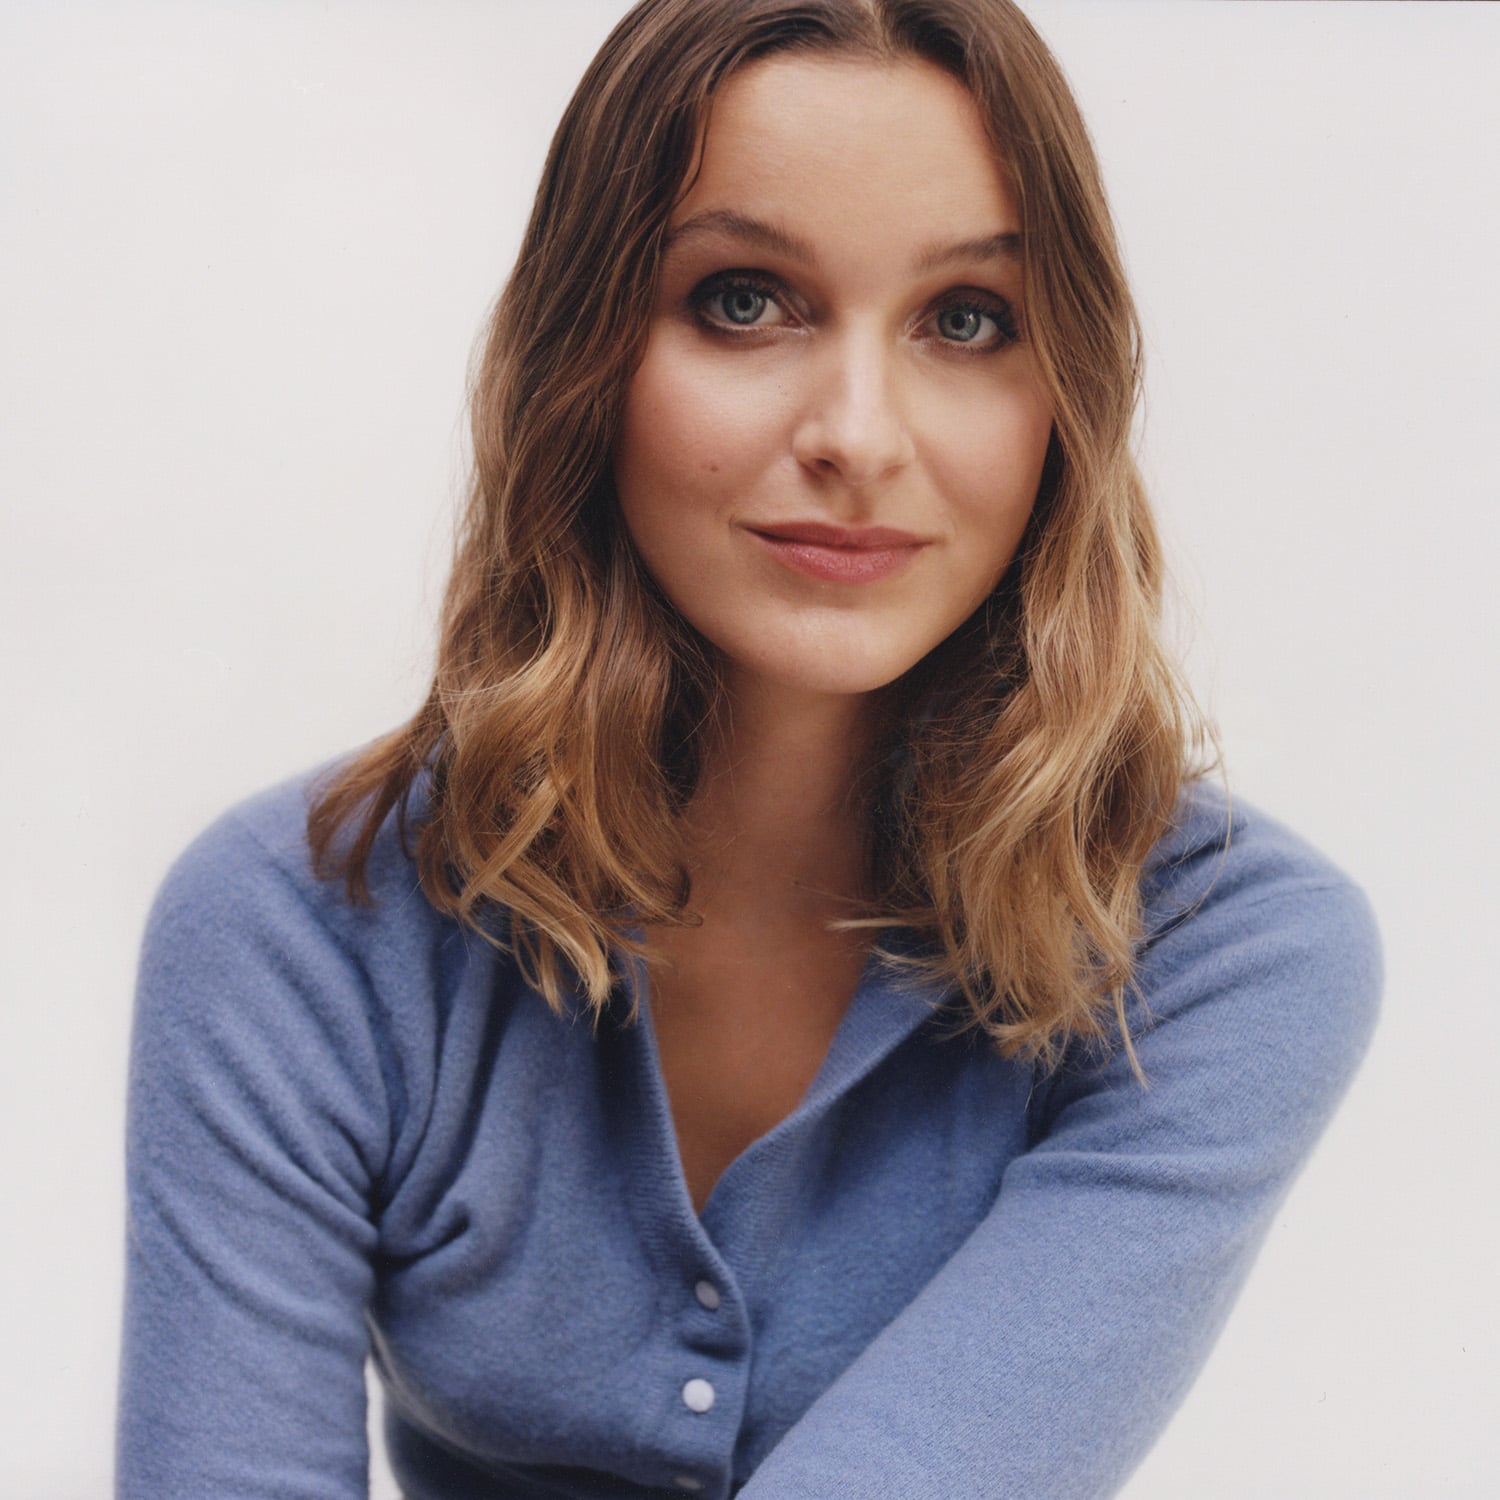 Profile photo of Rosie Viva wearing a blue jumper for Alex Monroe's Podcast